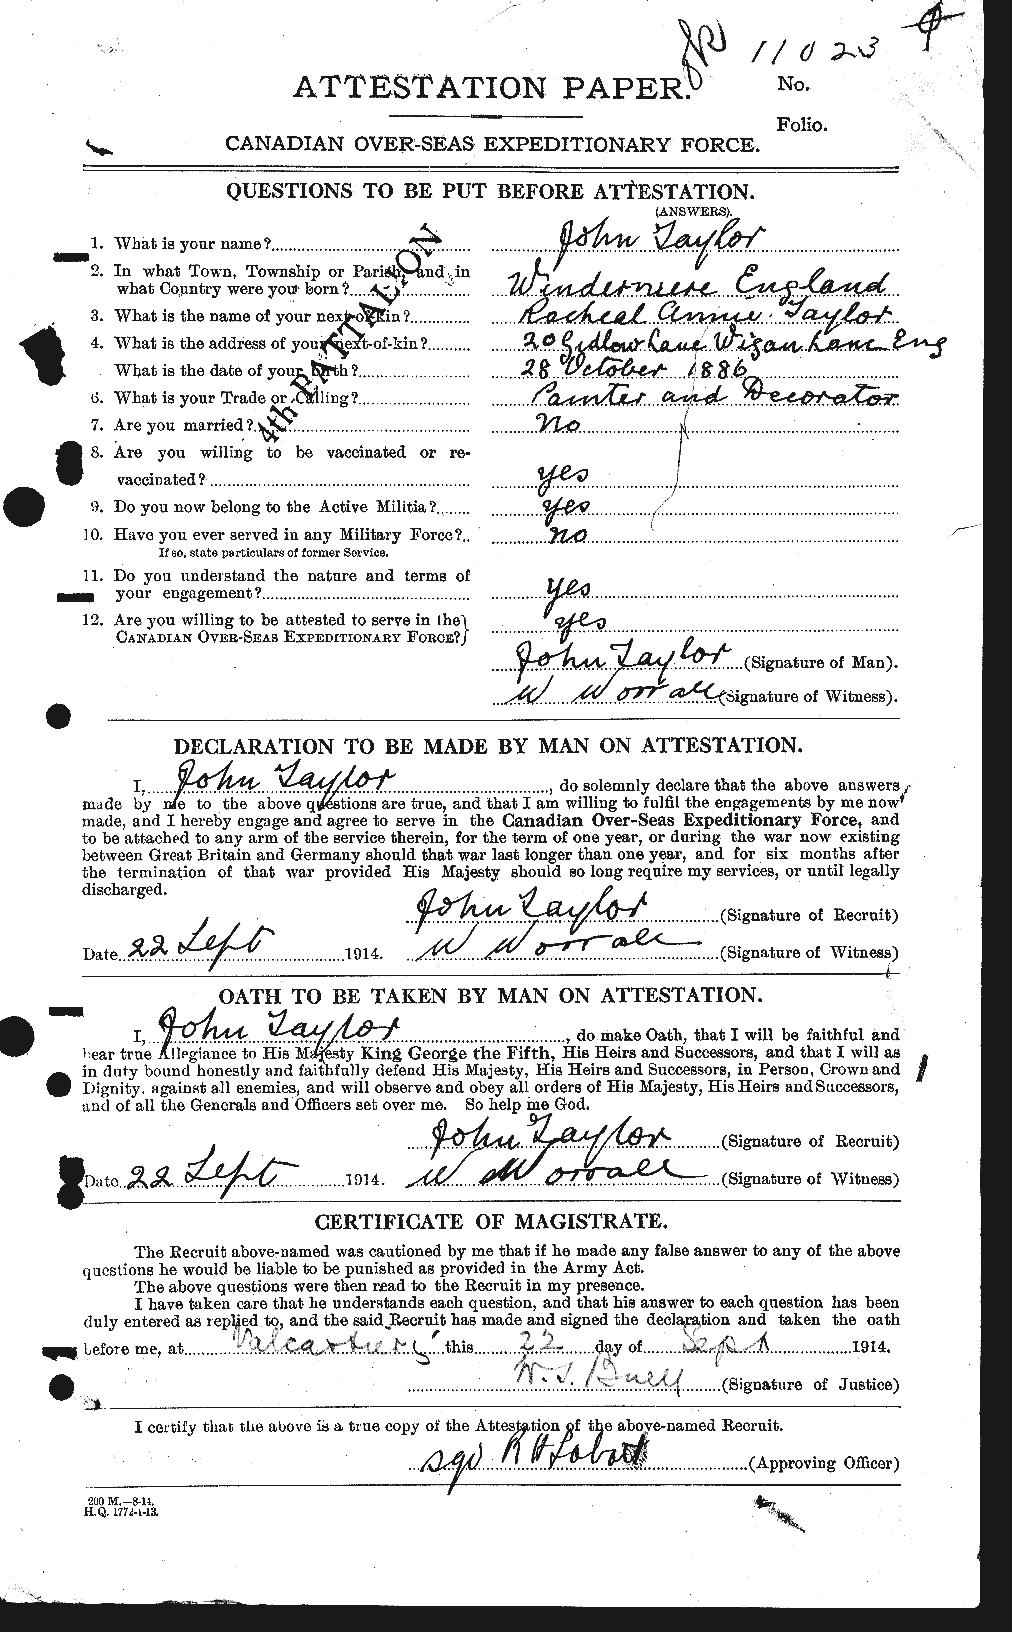 Personnel Records of the First World War - CEF 626981a